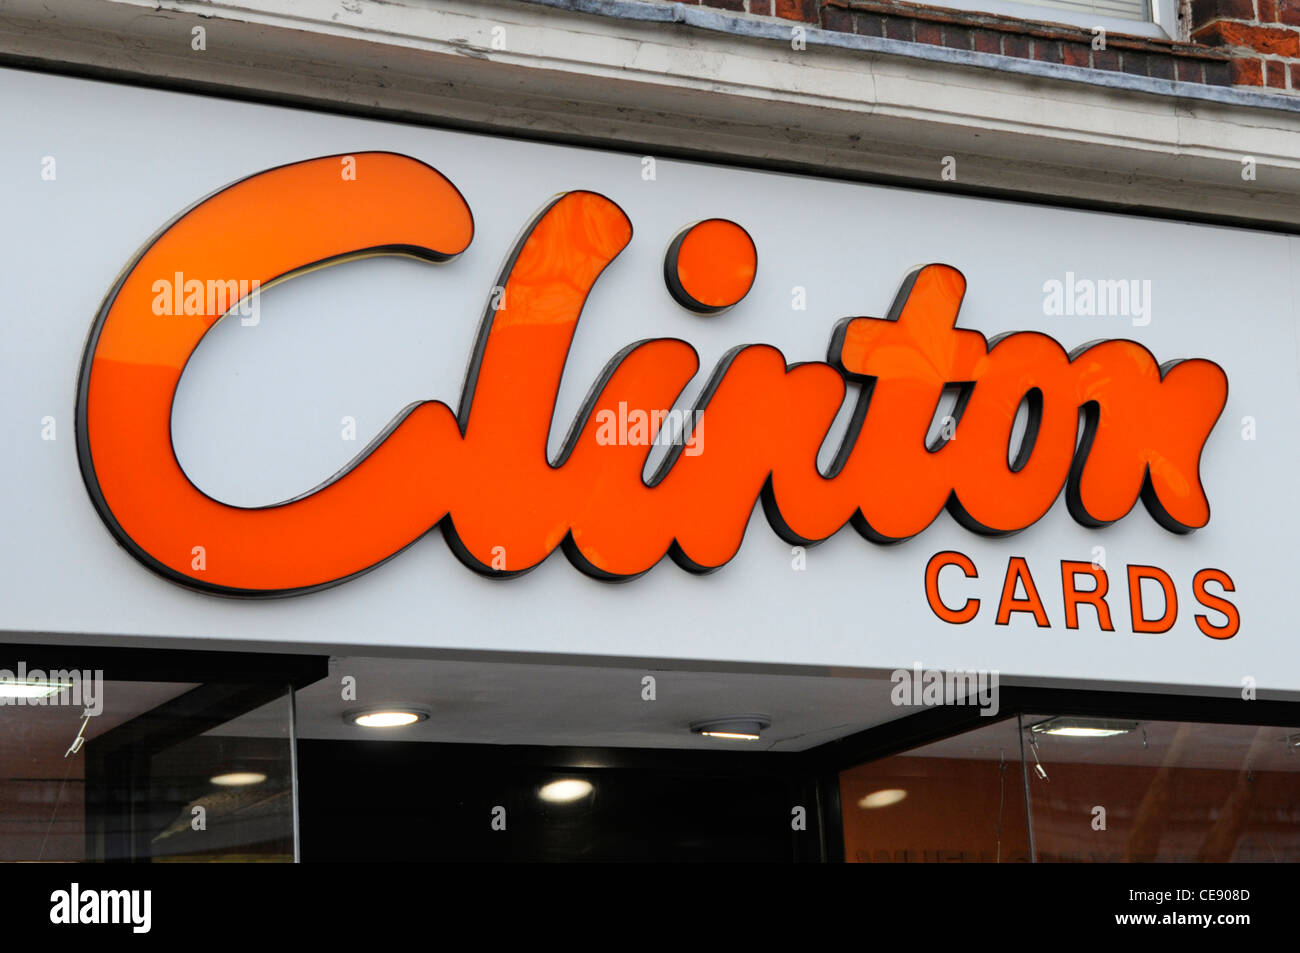 Clinton Cards chain store sign over shop in High Street Brentwood Essex England UK just before administration 2012 & new owner rebranded as Clintons Stock Photo